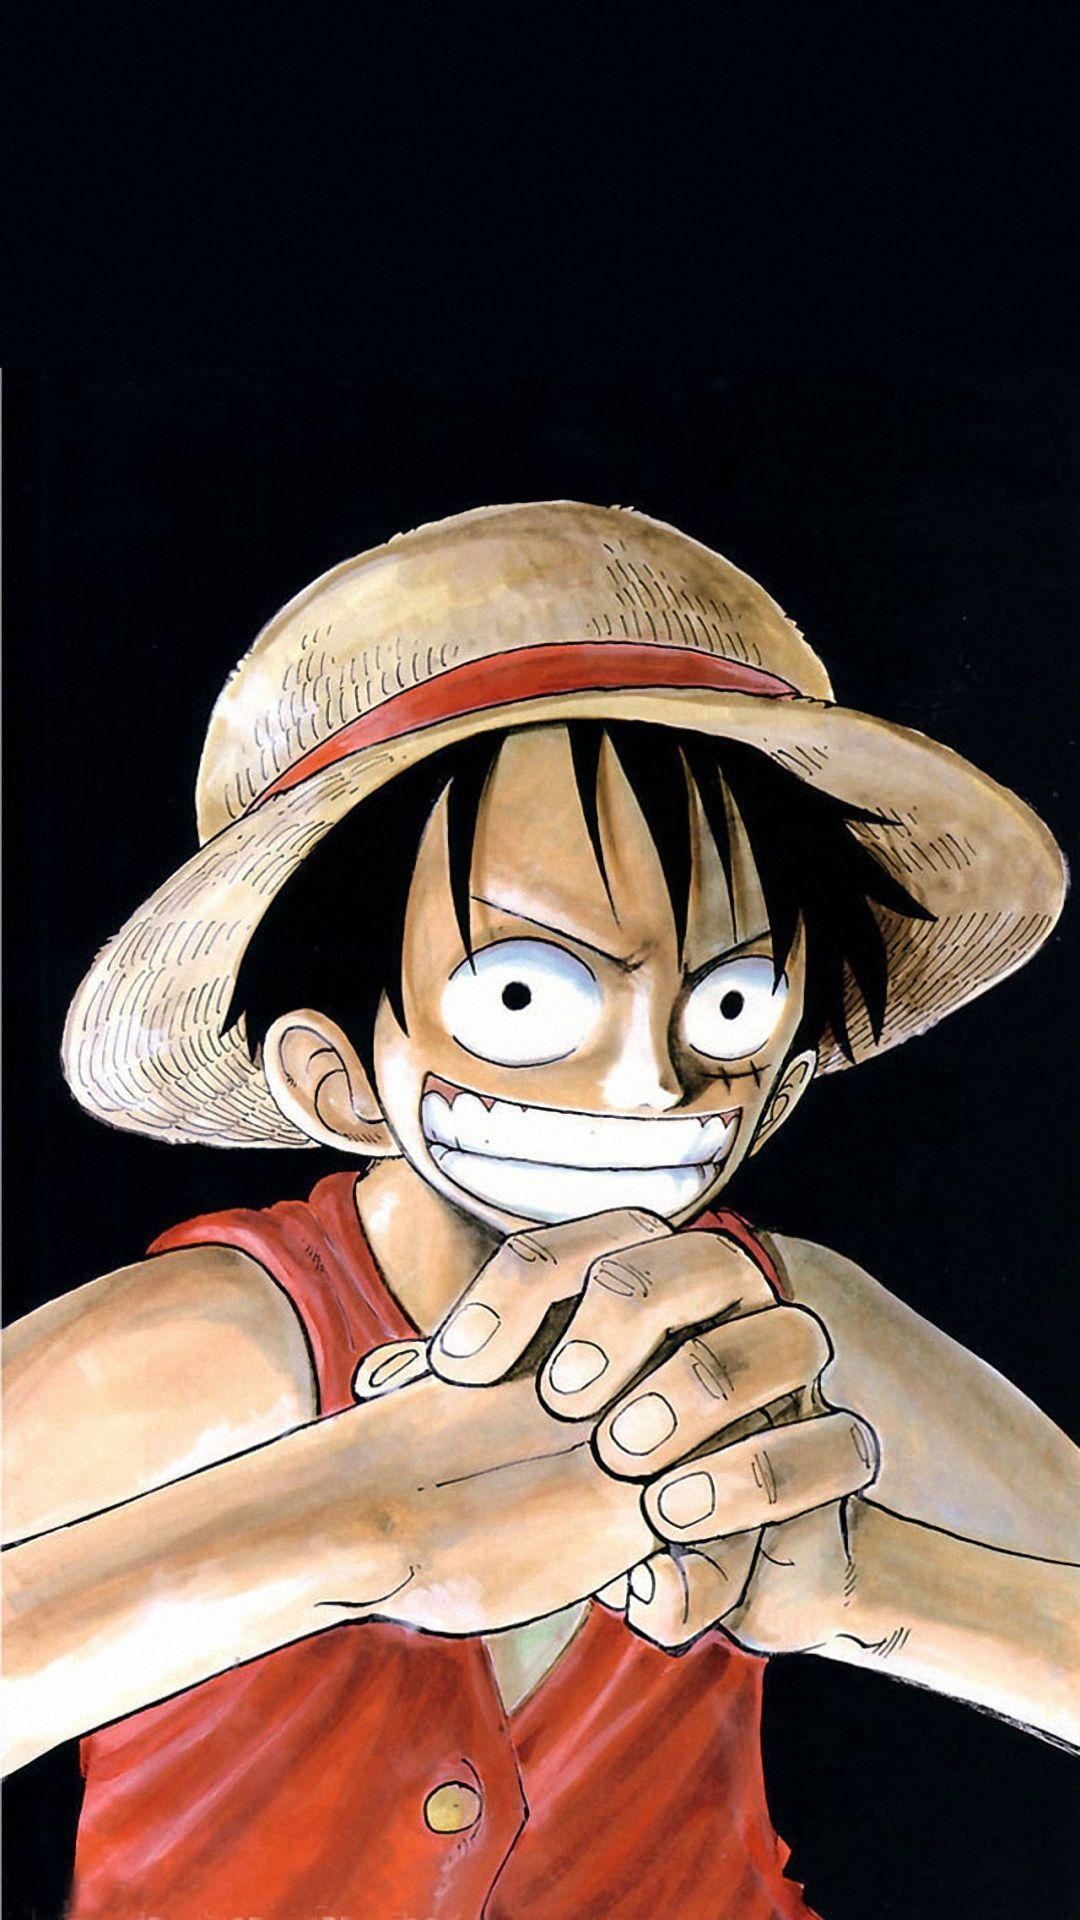 1080 x 1920 · jpeg - One Piece Mobile Wallpapers - Wallpaper Cave